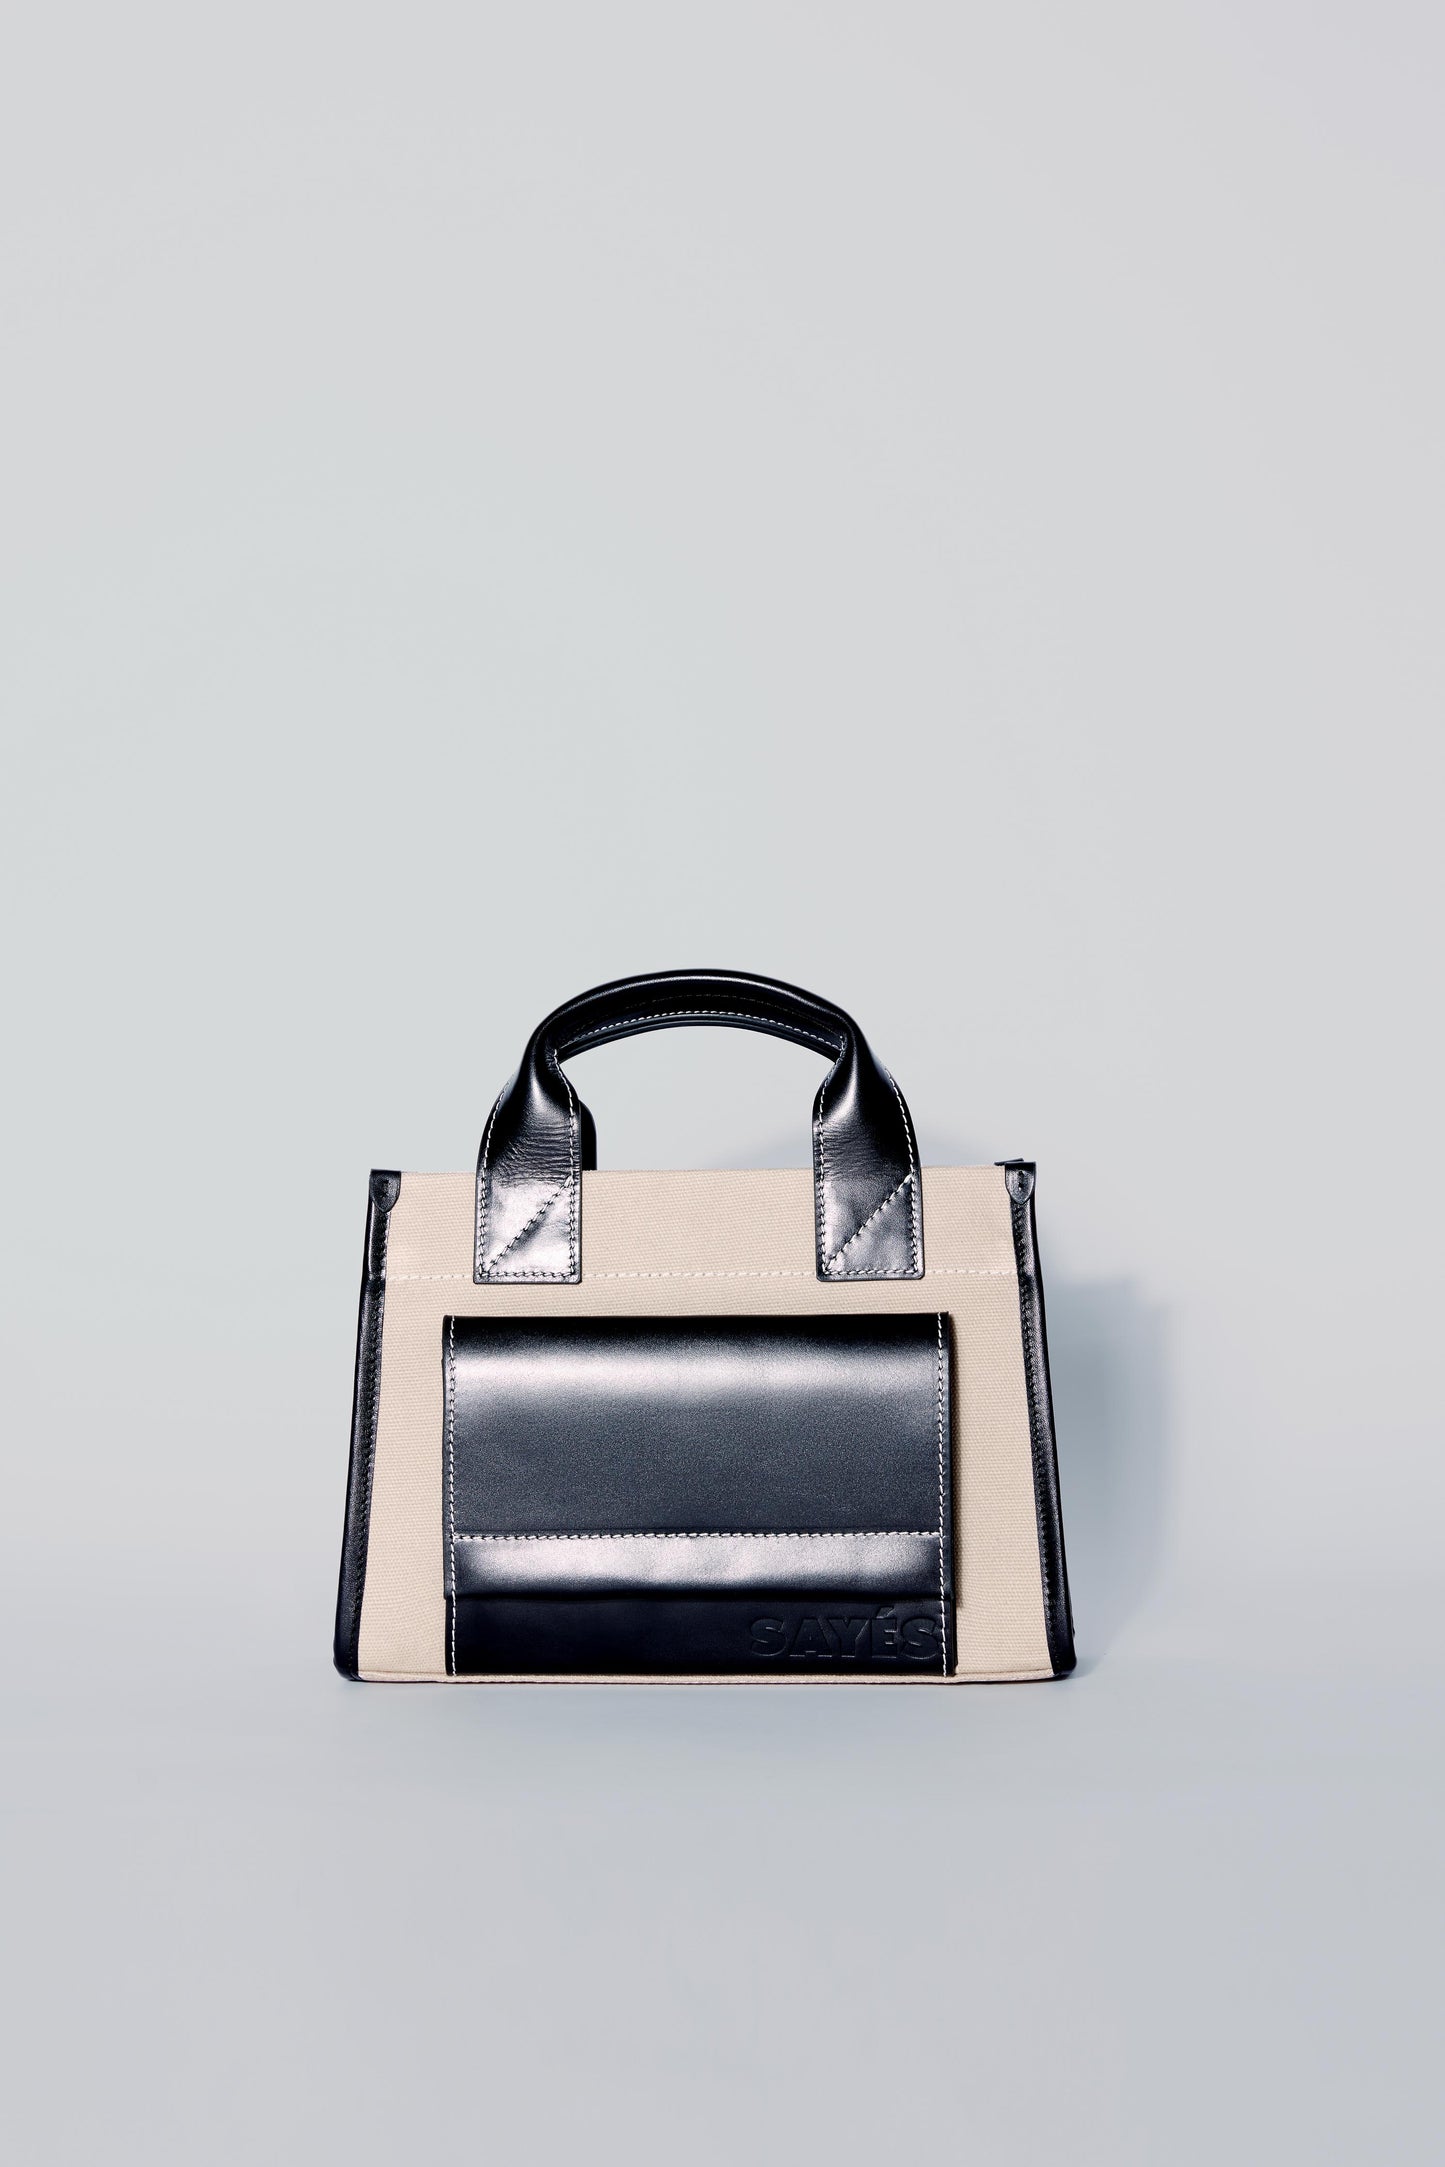 STITCHED POCKET MINI TOTE IN BEIGE AND BLACK